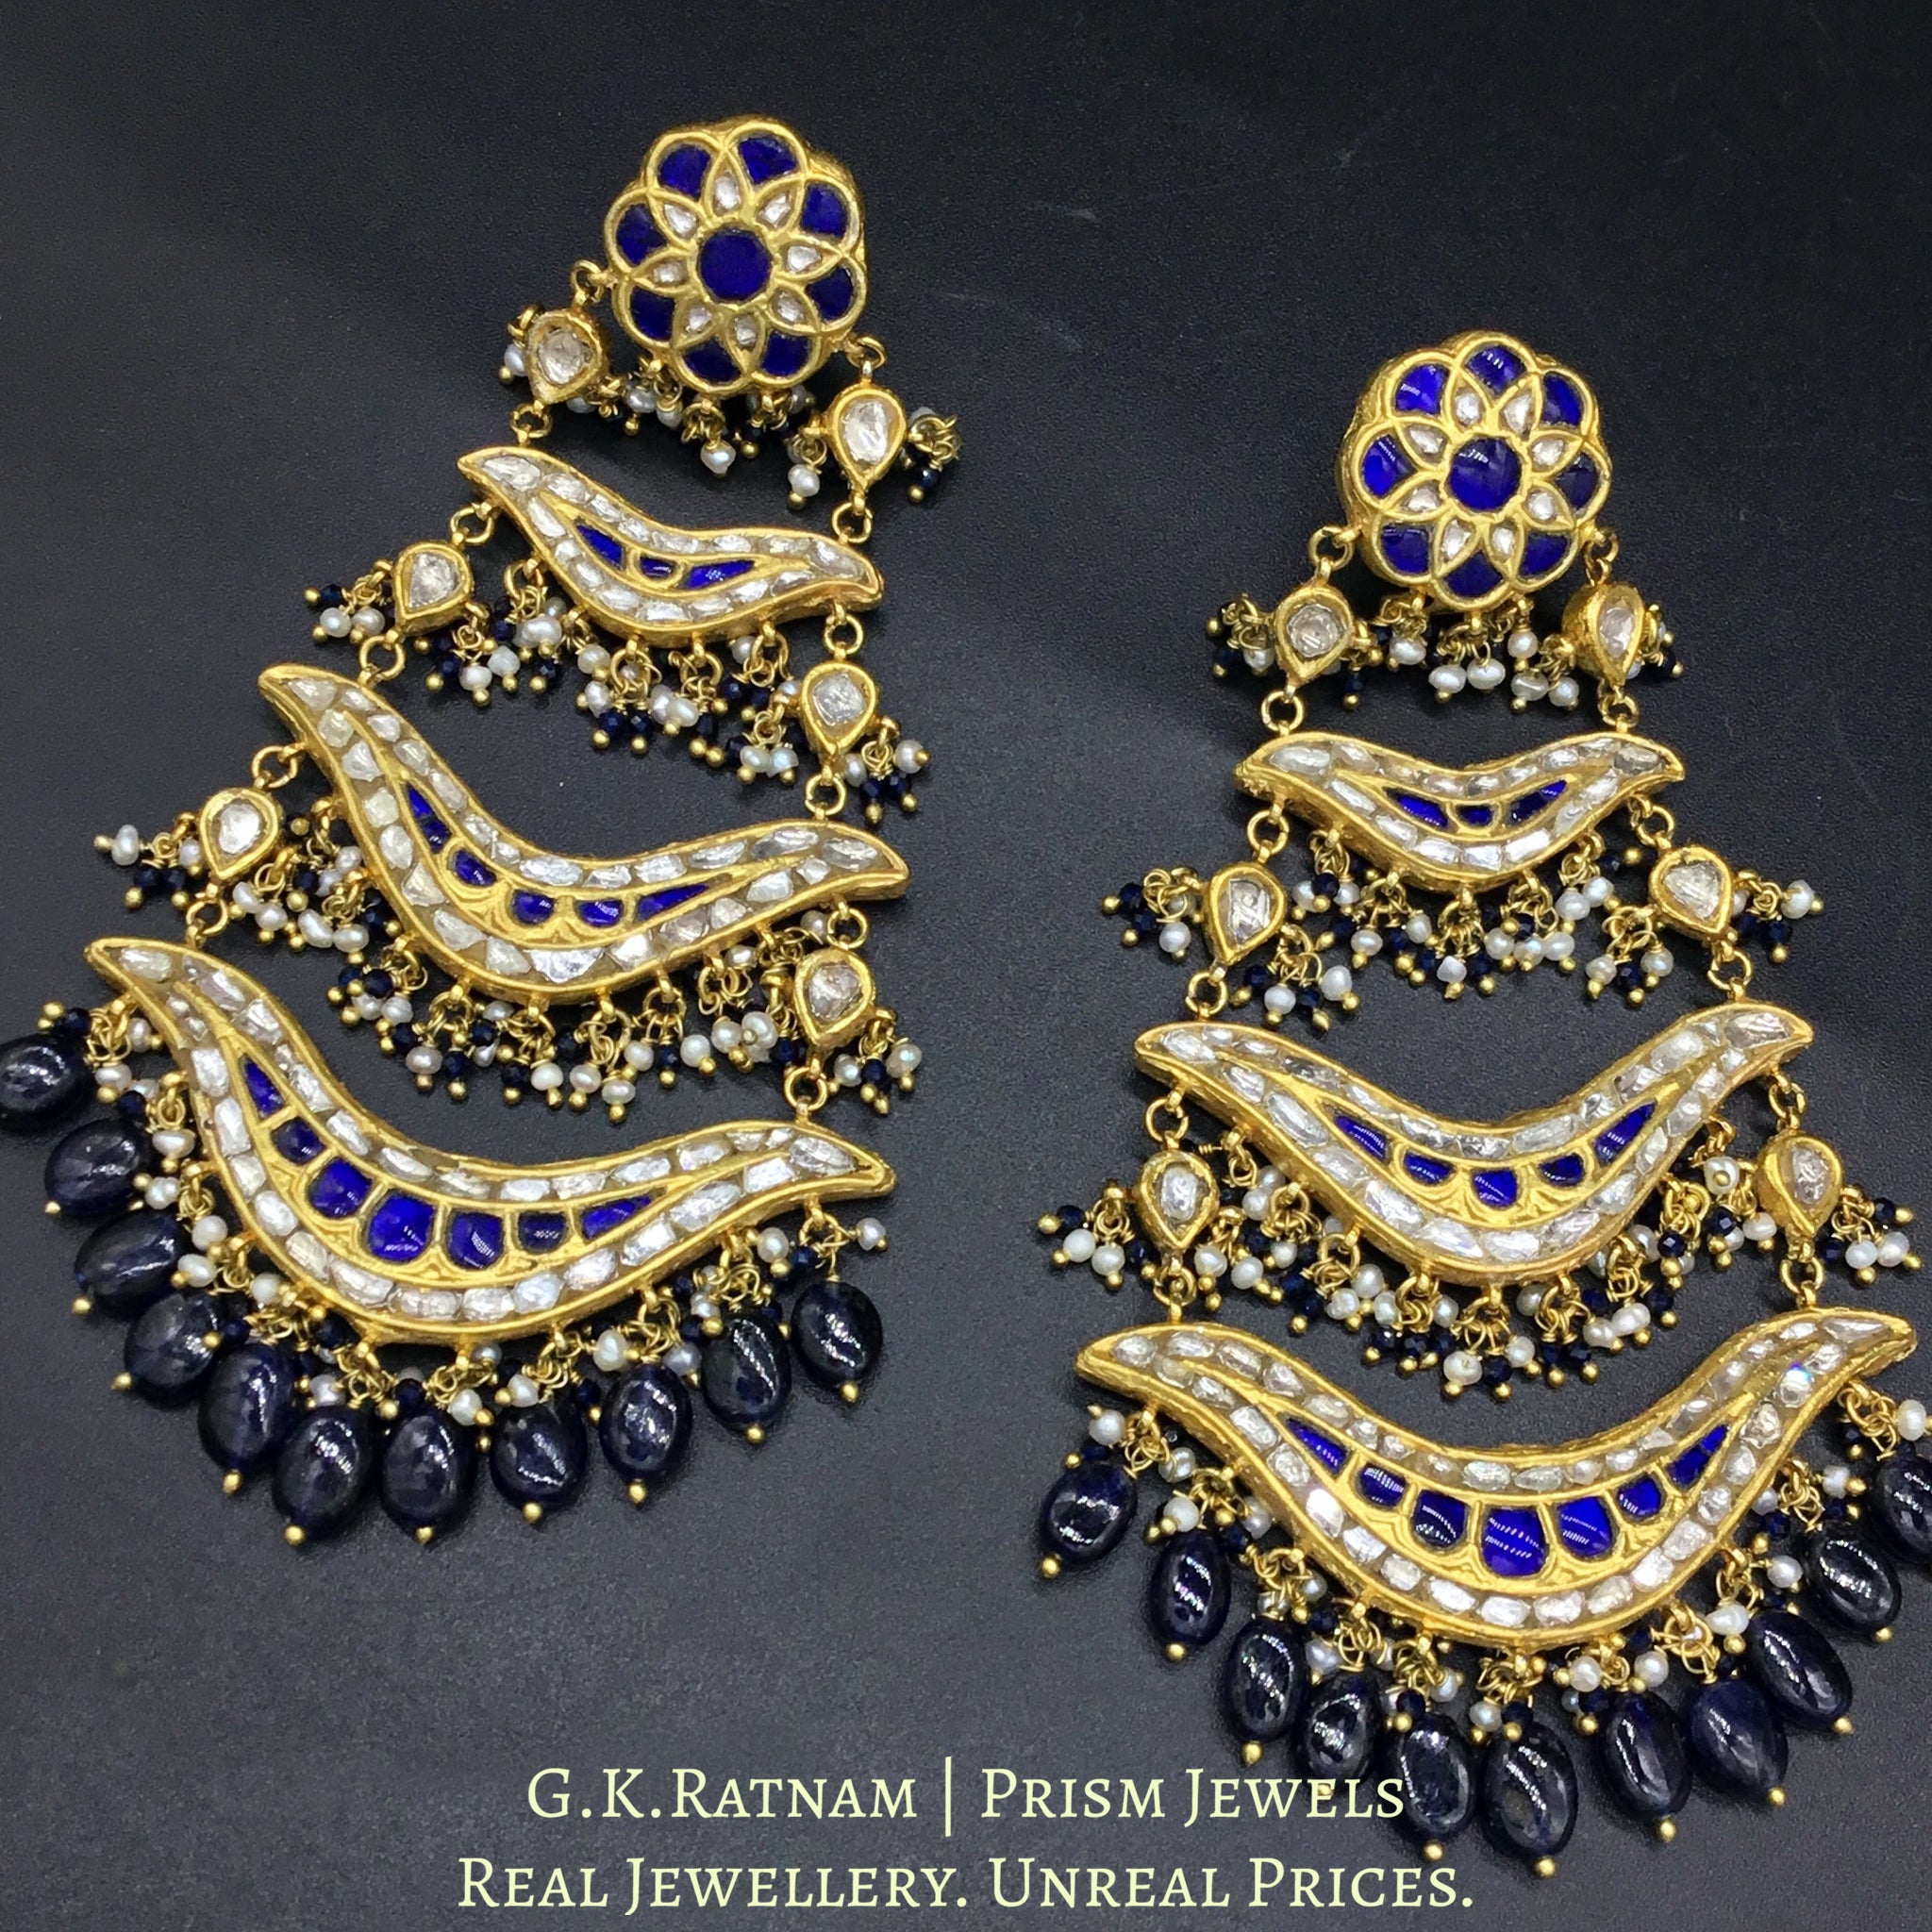 23k Gold and Diamond Polki pasa-style Chandelier Earring Pair with a hint of blue